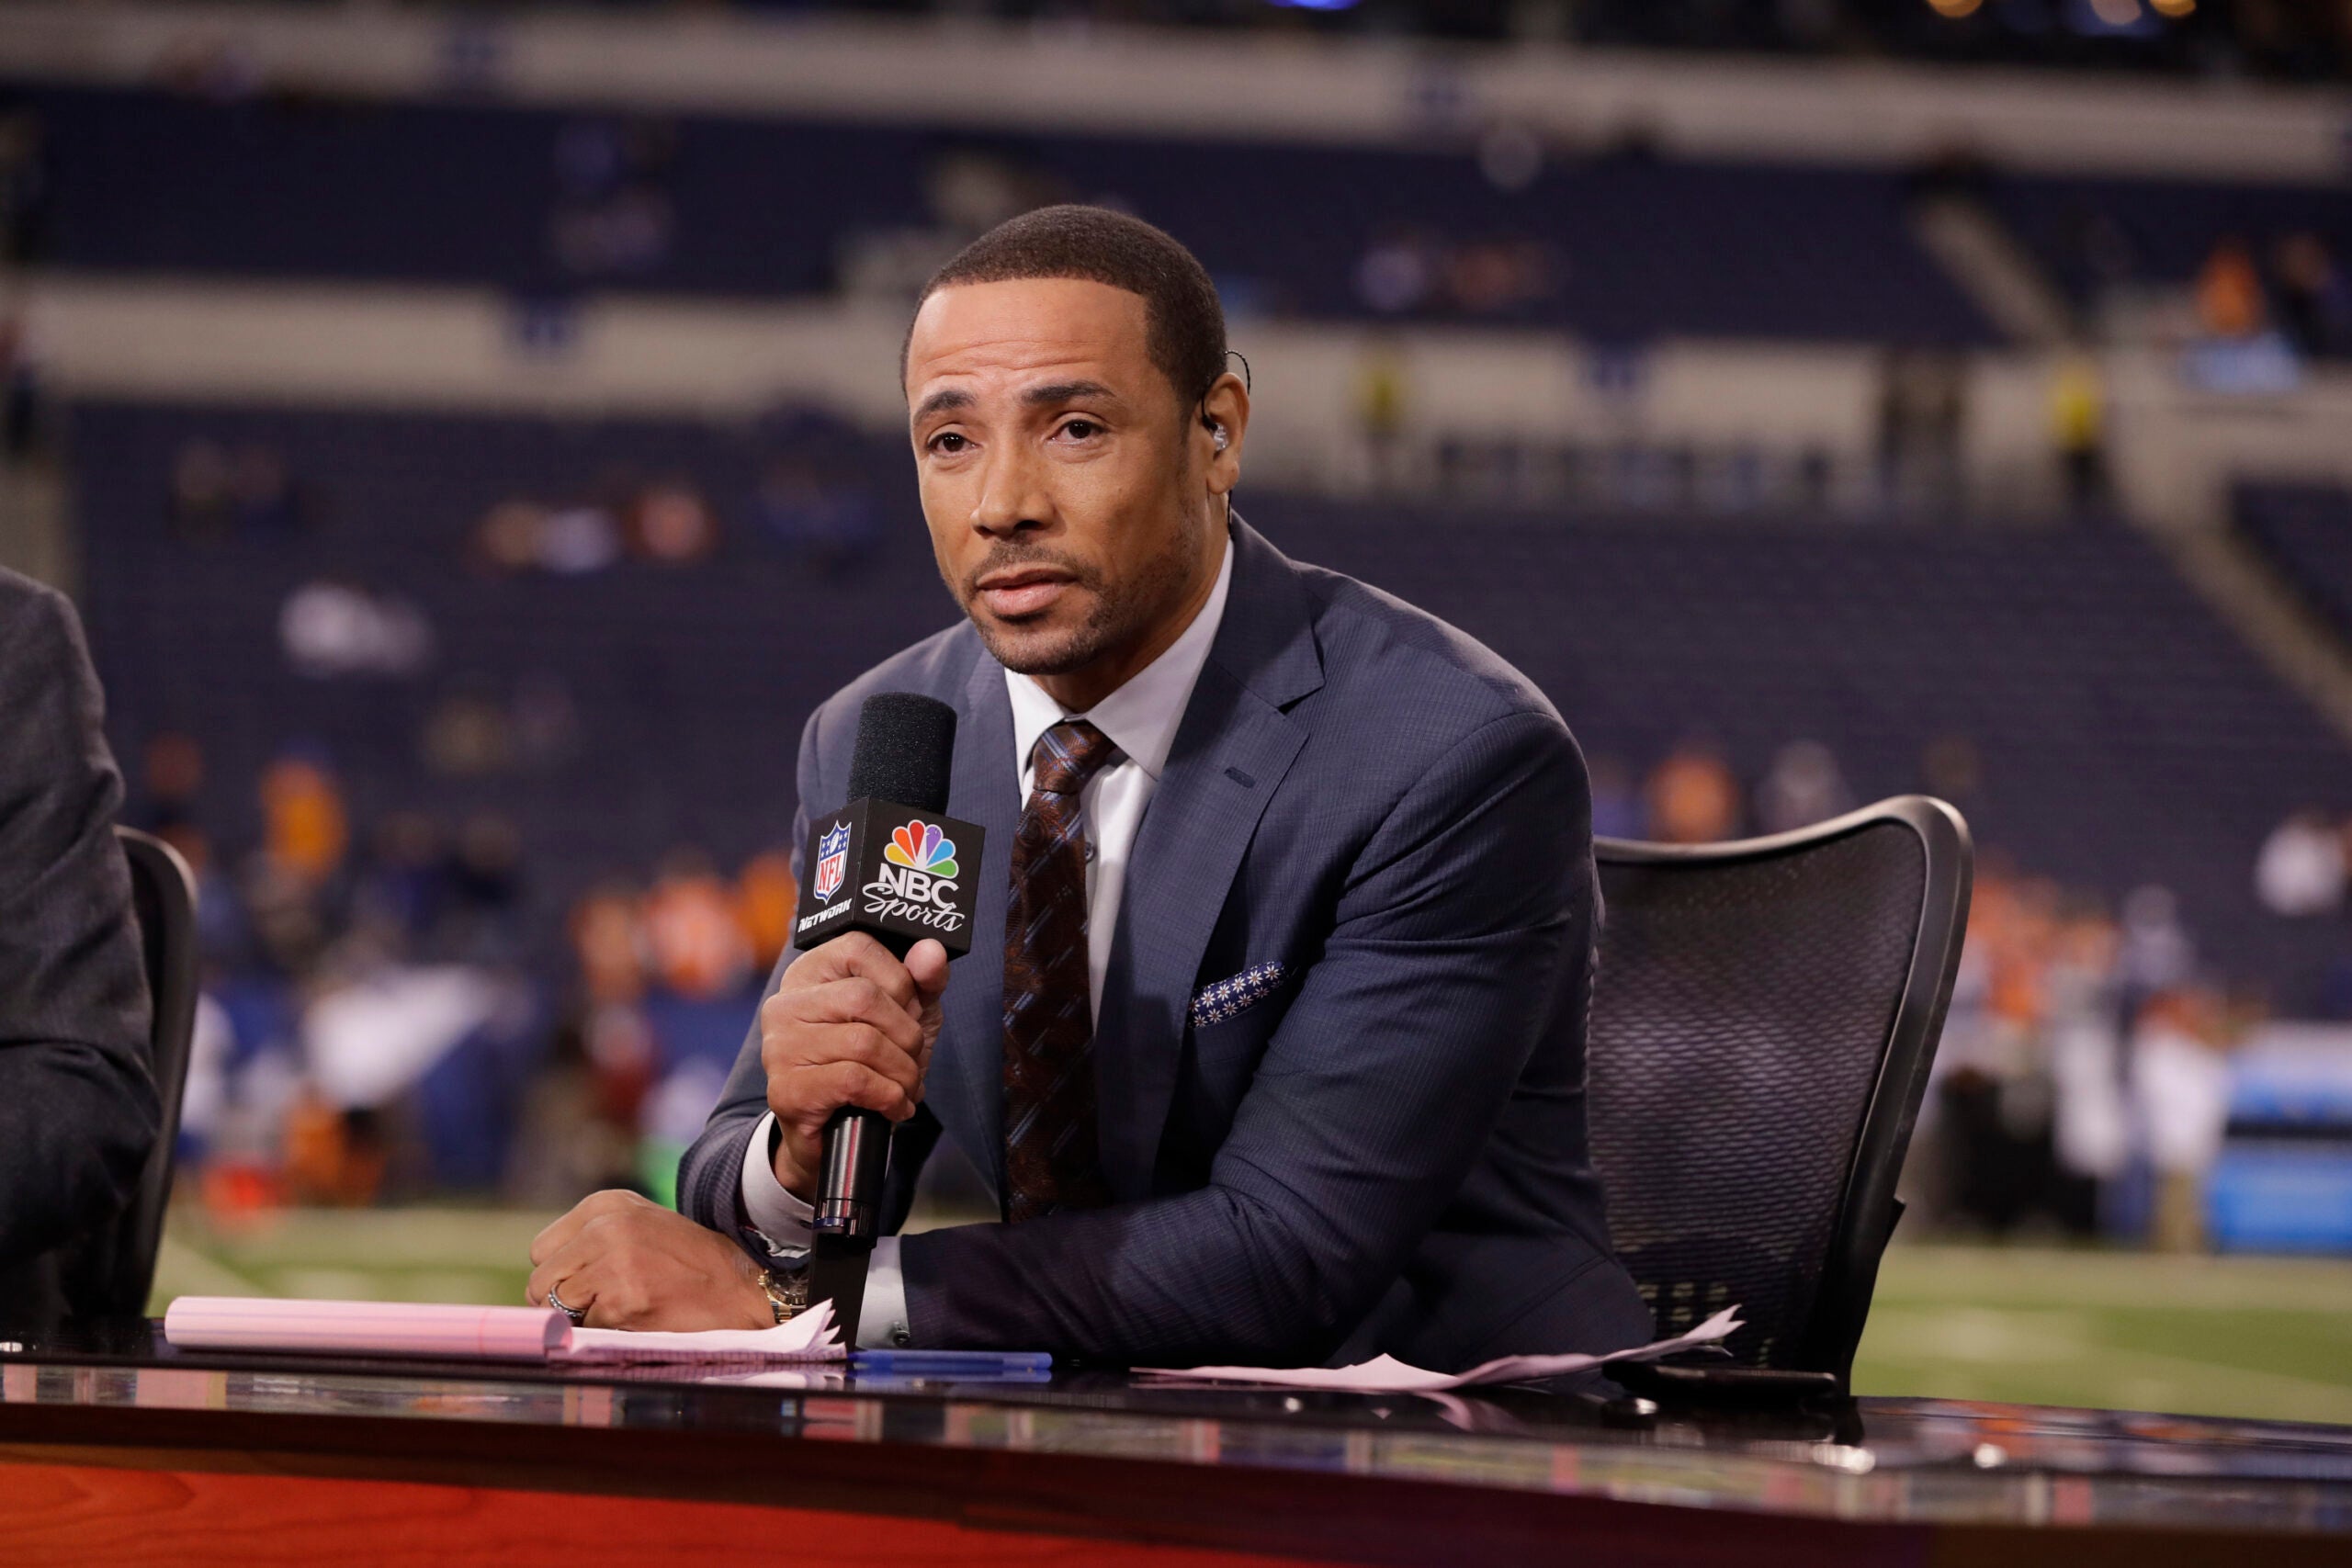 Analyst Rodney Harrison talks on set before an NFL football game between the Indianapolis Colts and Denver Broncos in Indianapolis, Thursday, Dec. 14, 2017.